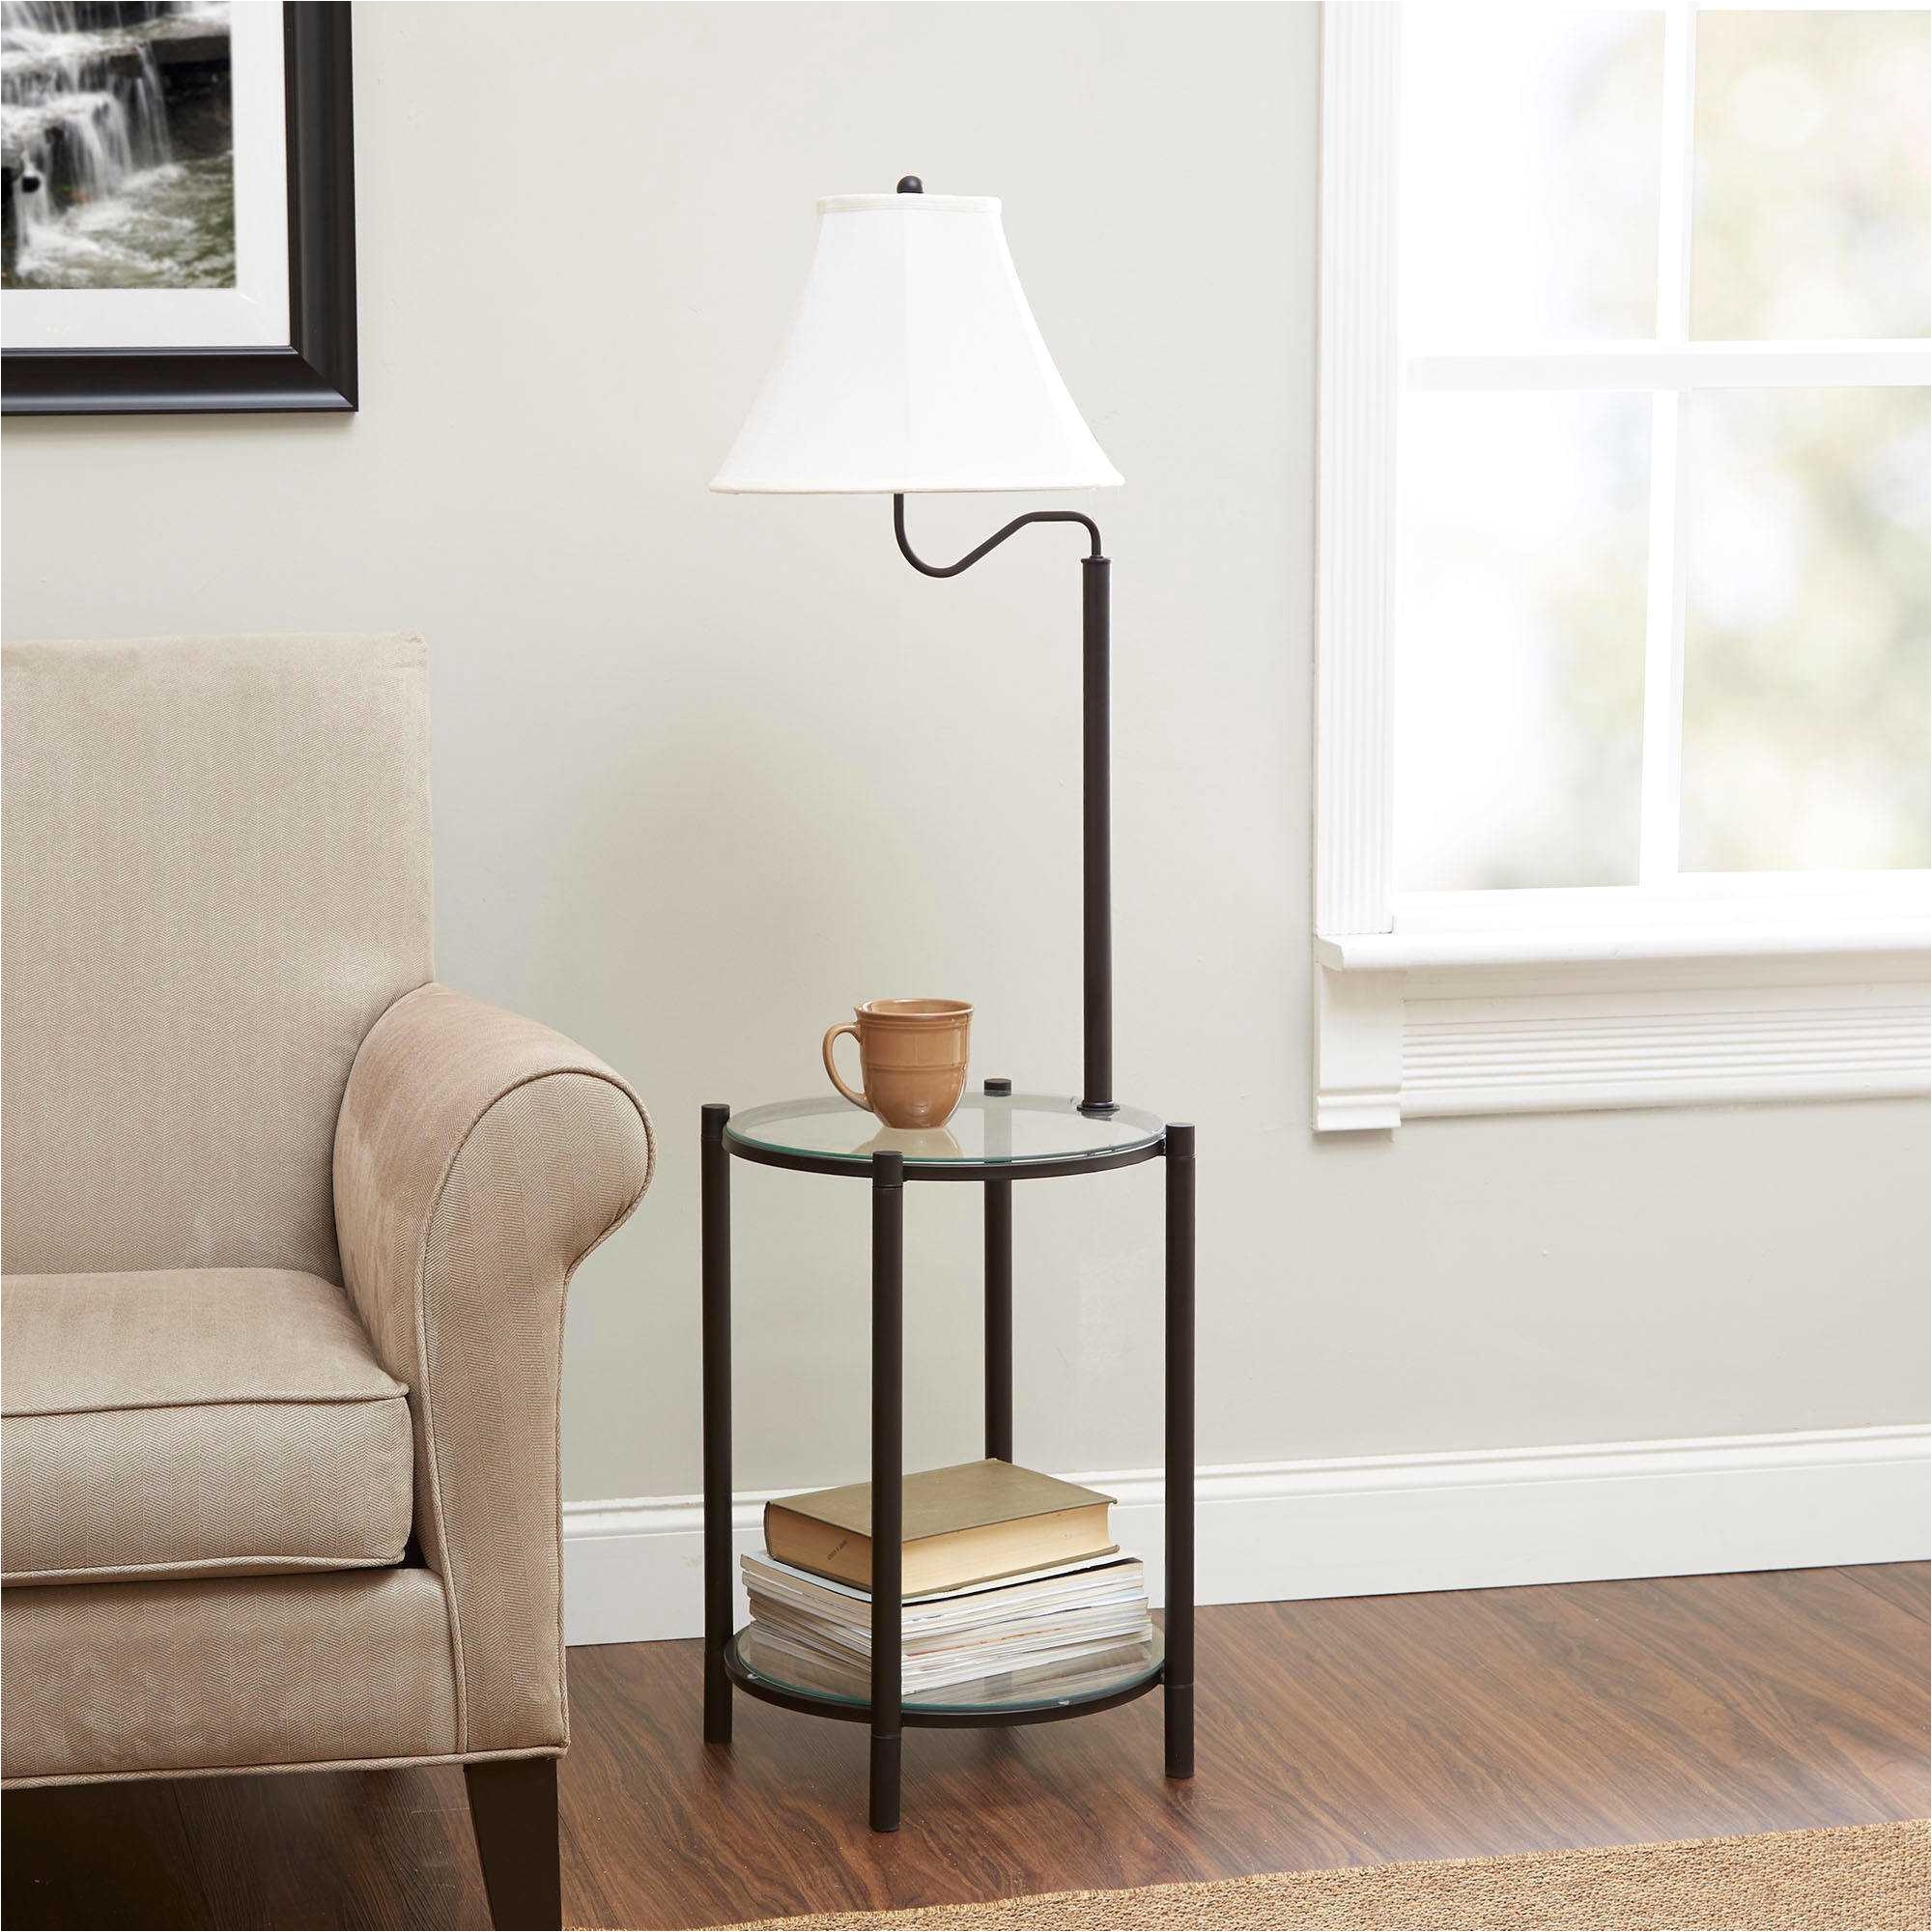 Pretty Living Room Light Stand In Lamp Lamp Lamp Unique Contemporary Table Lamp Free Table Lamps 0d